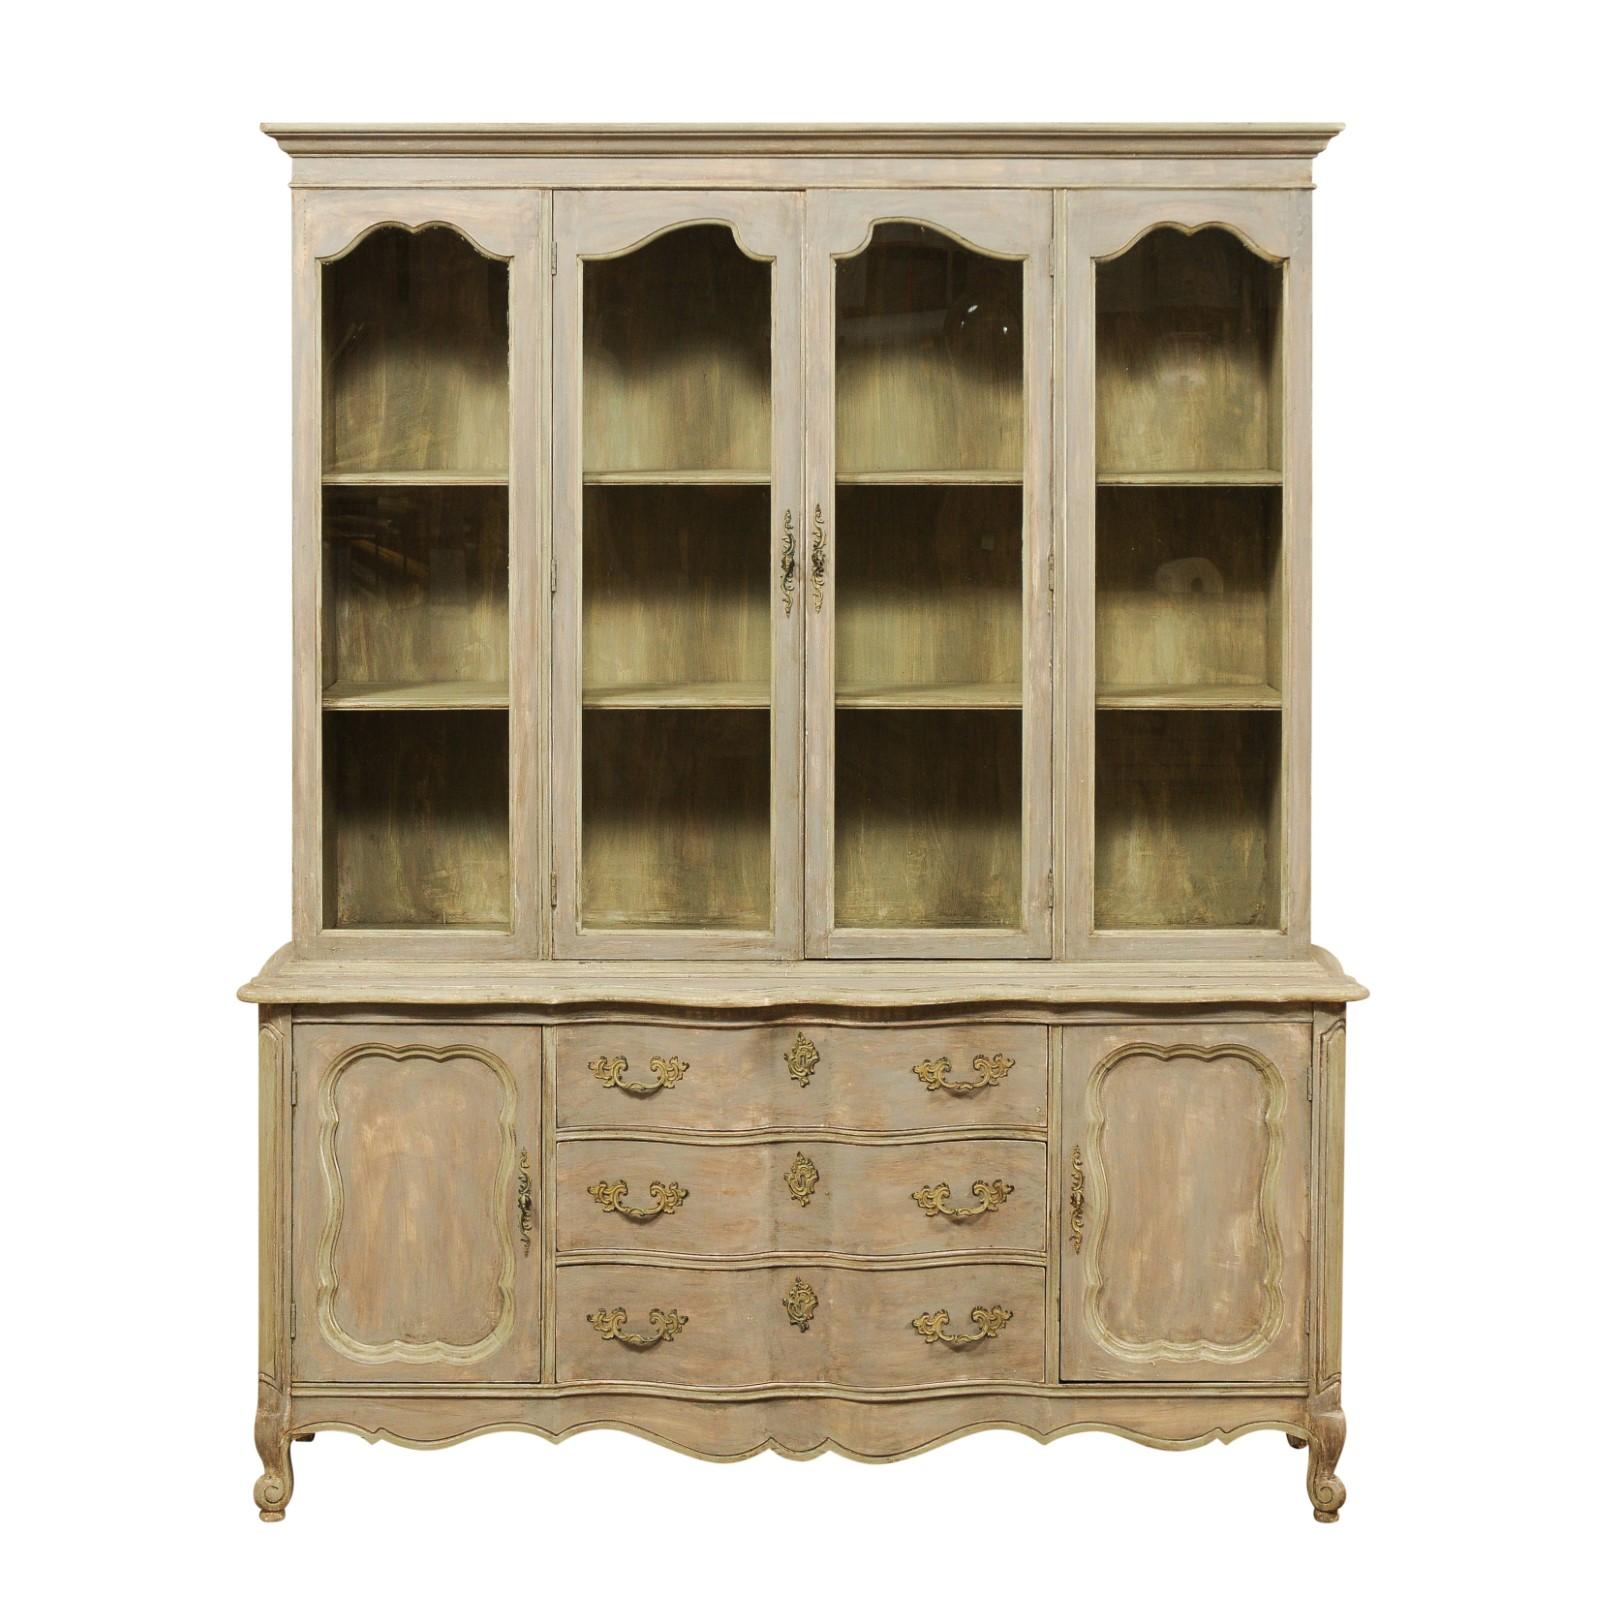 French Style Mid-20th Century Wood and Glass Display and Storage Cabinet